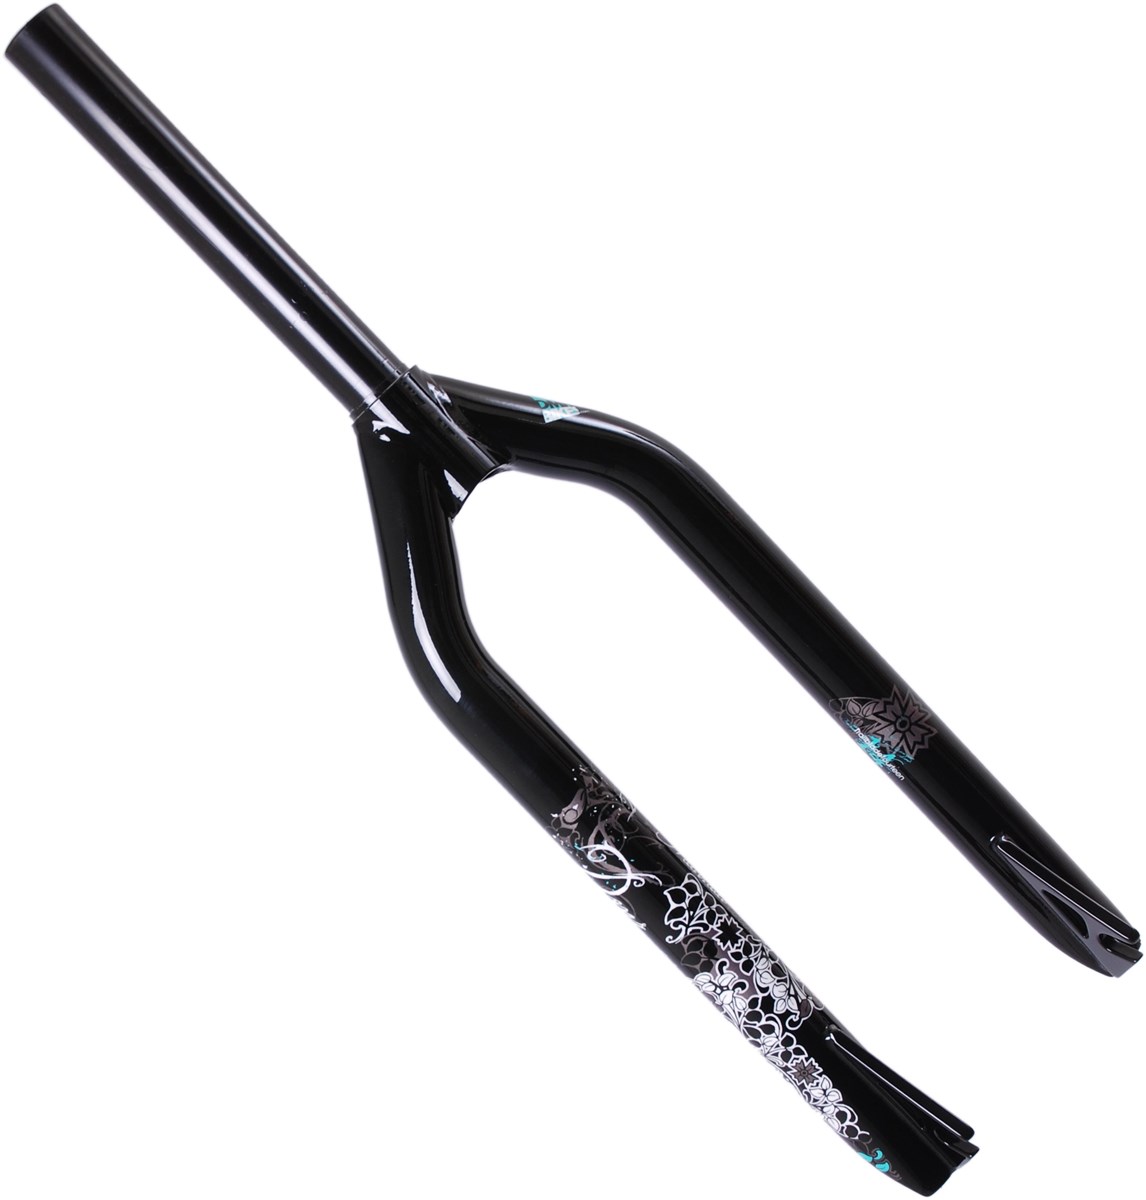 DMR Trailblade 2 Fork 14mm Axle product image